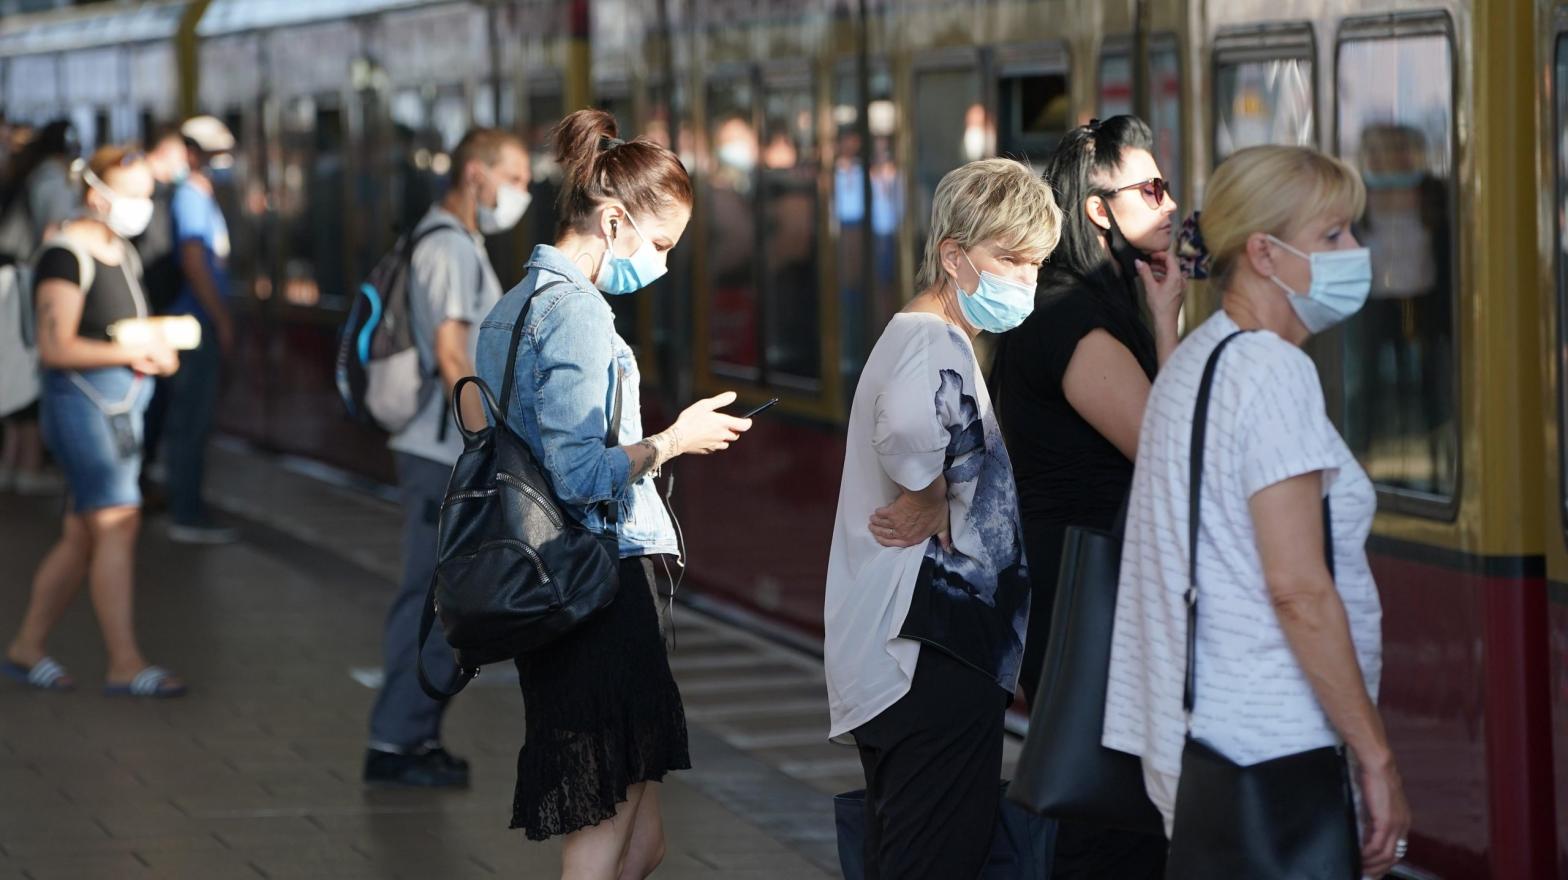 Commuters wearing protective face masks board a train on August 07, 2020 in Berlin, Germany. (Photo: Sean Gallup, Getty Images)